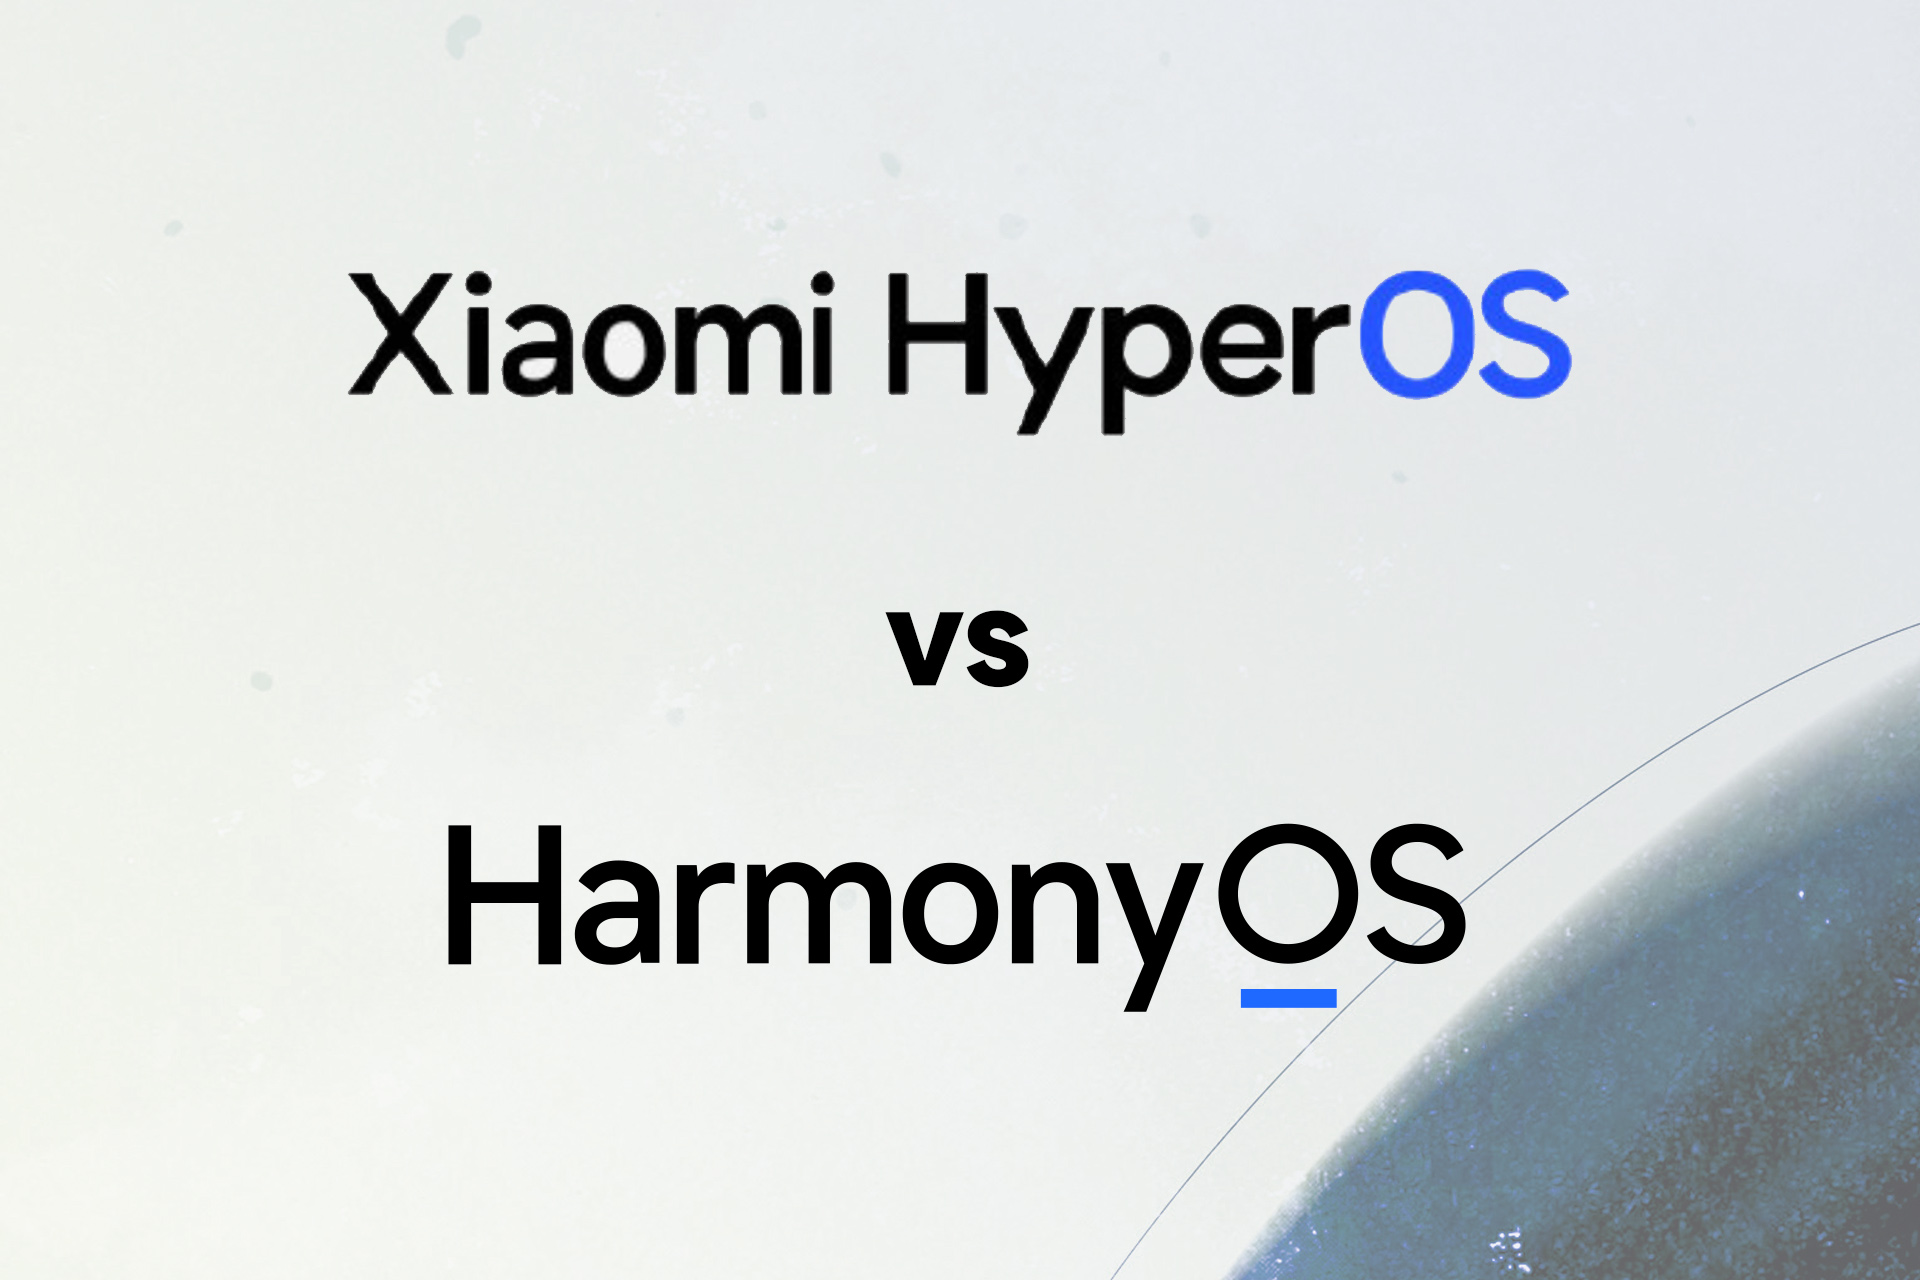 HyperOS vs HarmonyOS - What are the main differences?